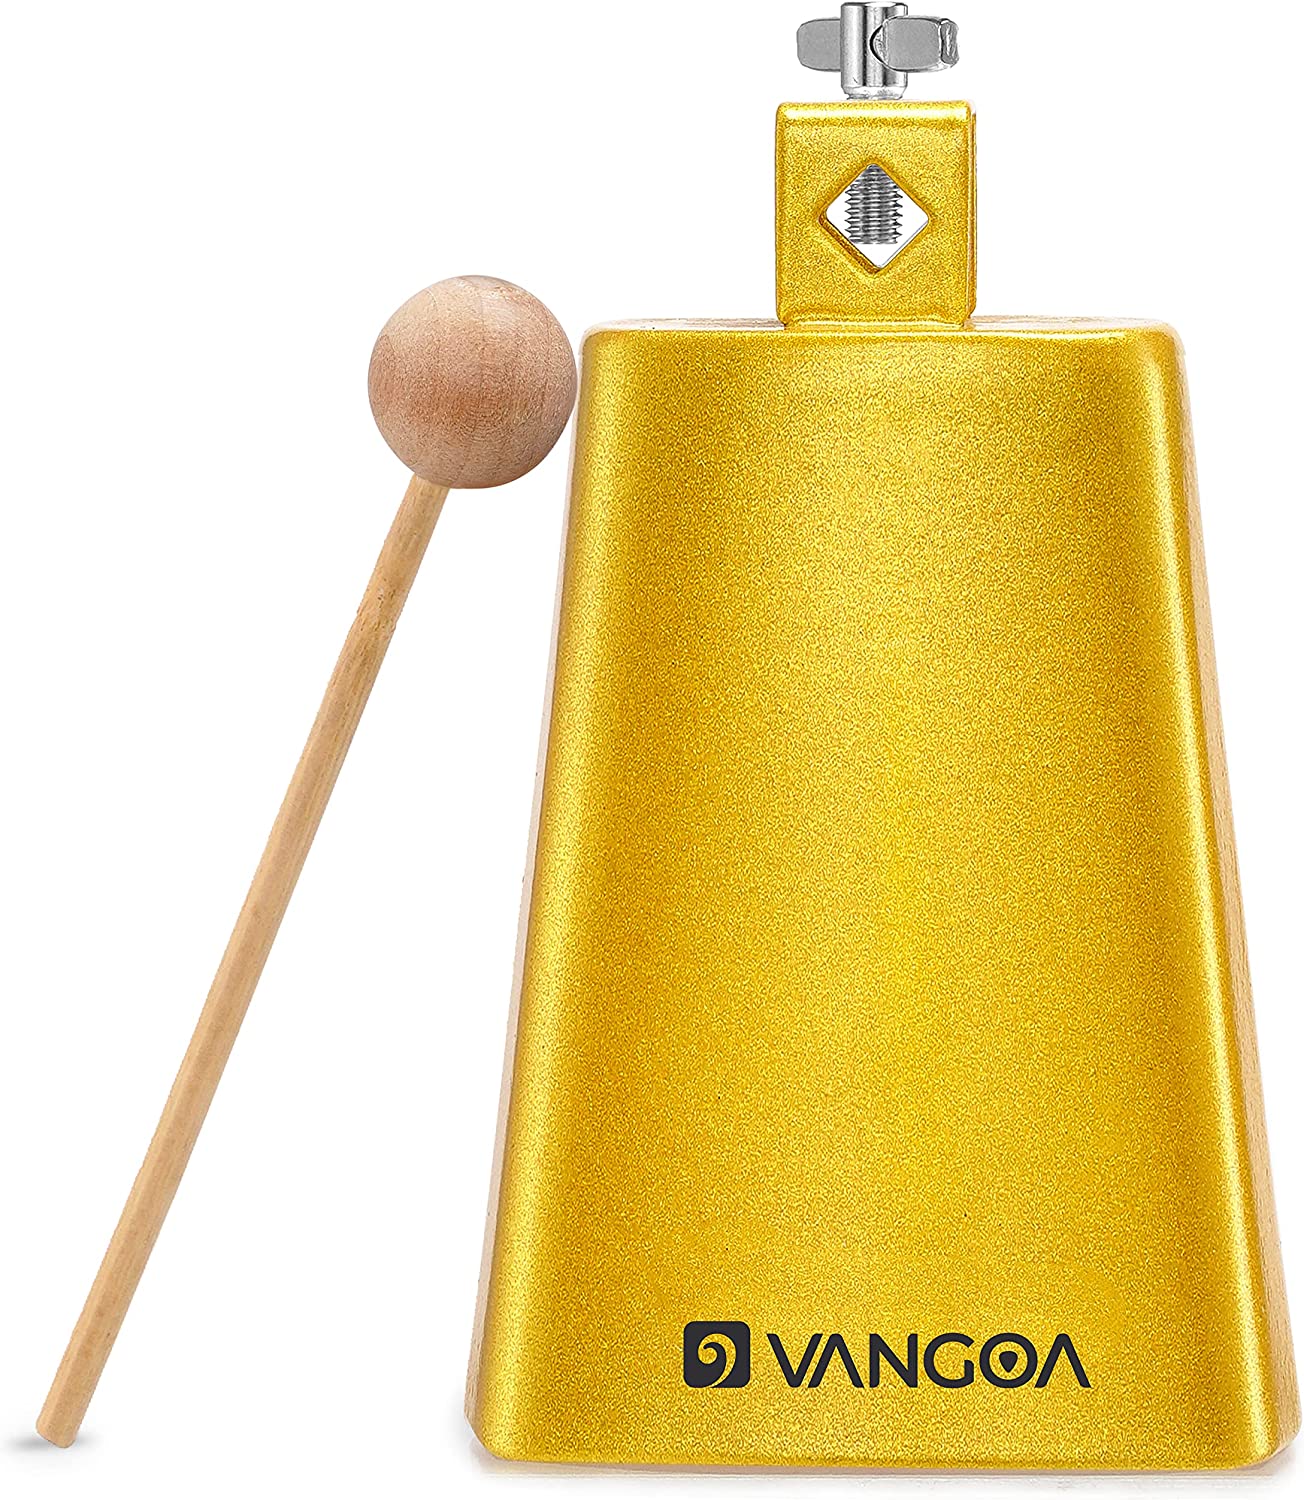 available on ]Vangoa 7 Inch Cow Bell With Mallet Beater Sticks